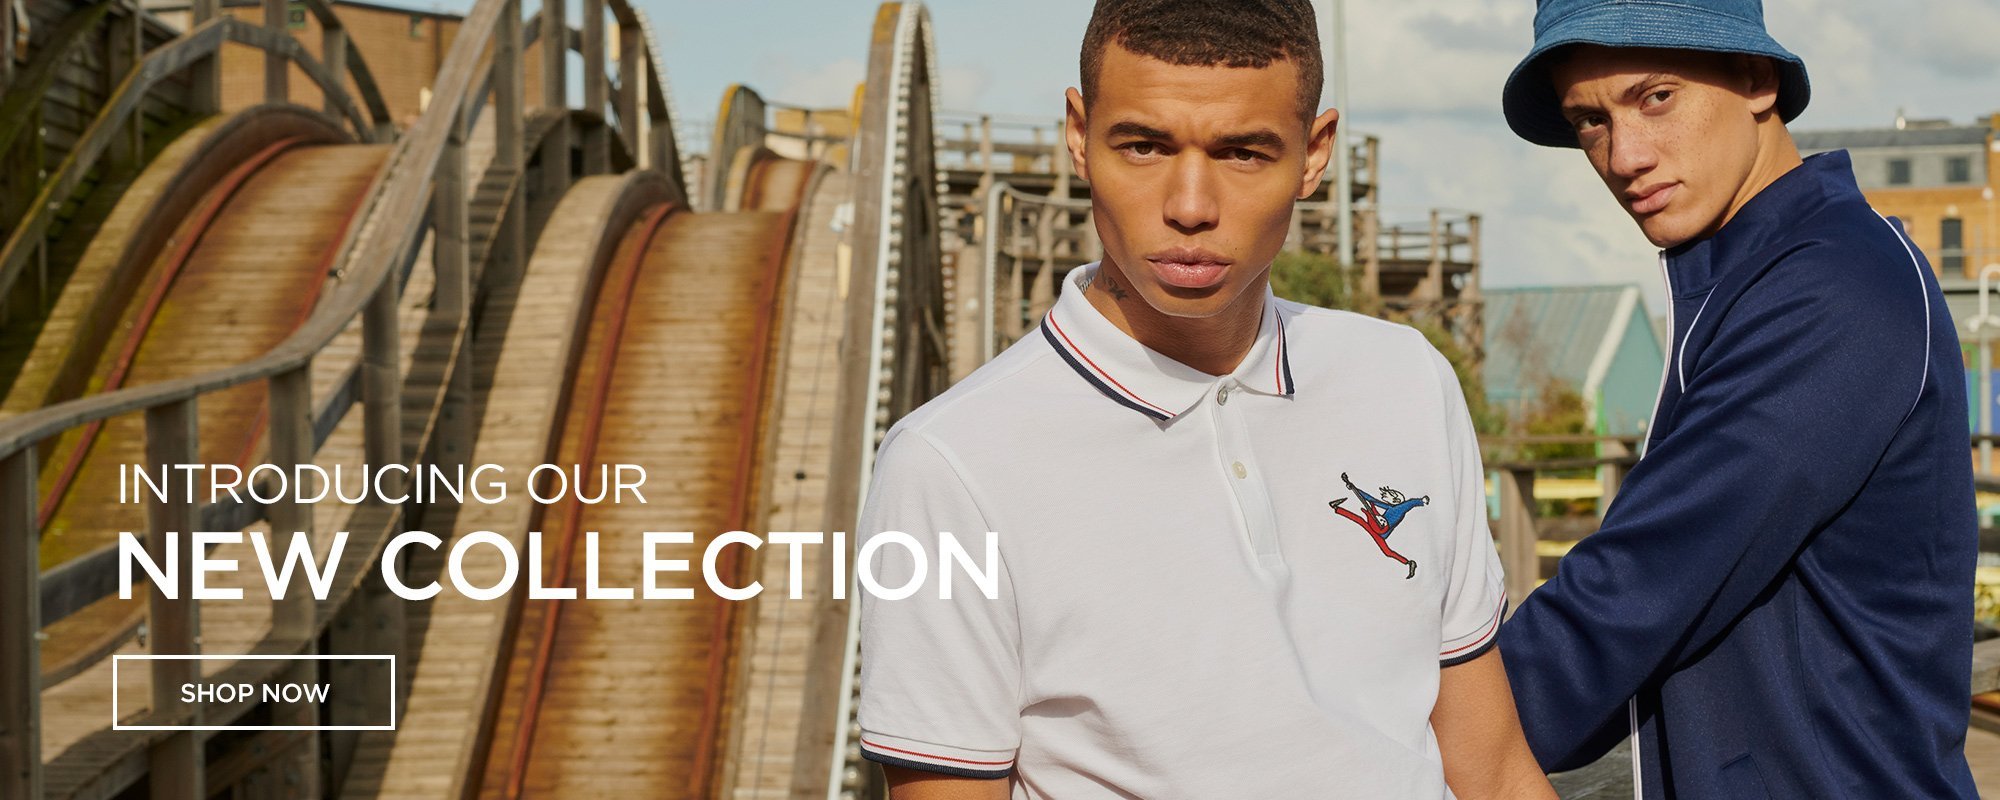 Introducing our new collection | Shop Now